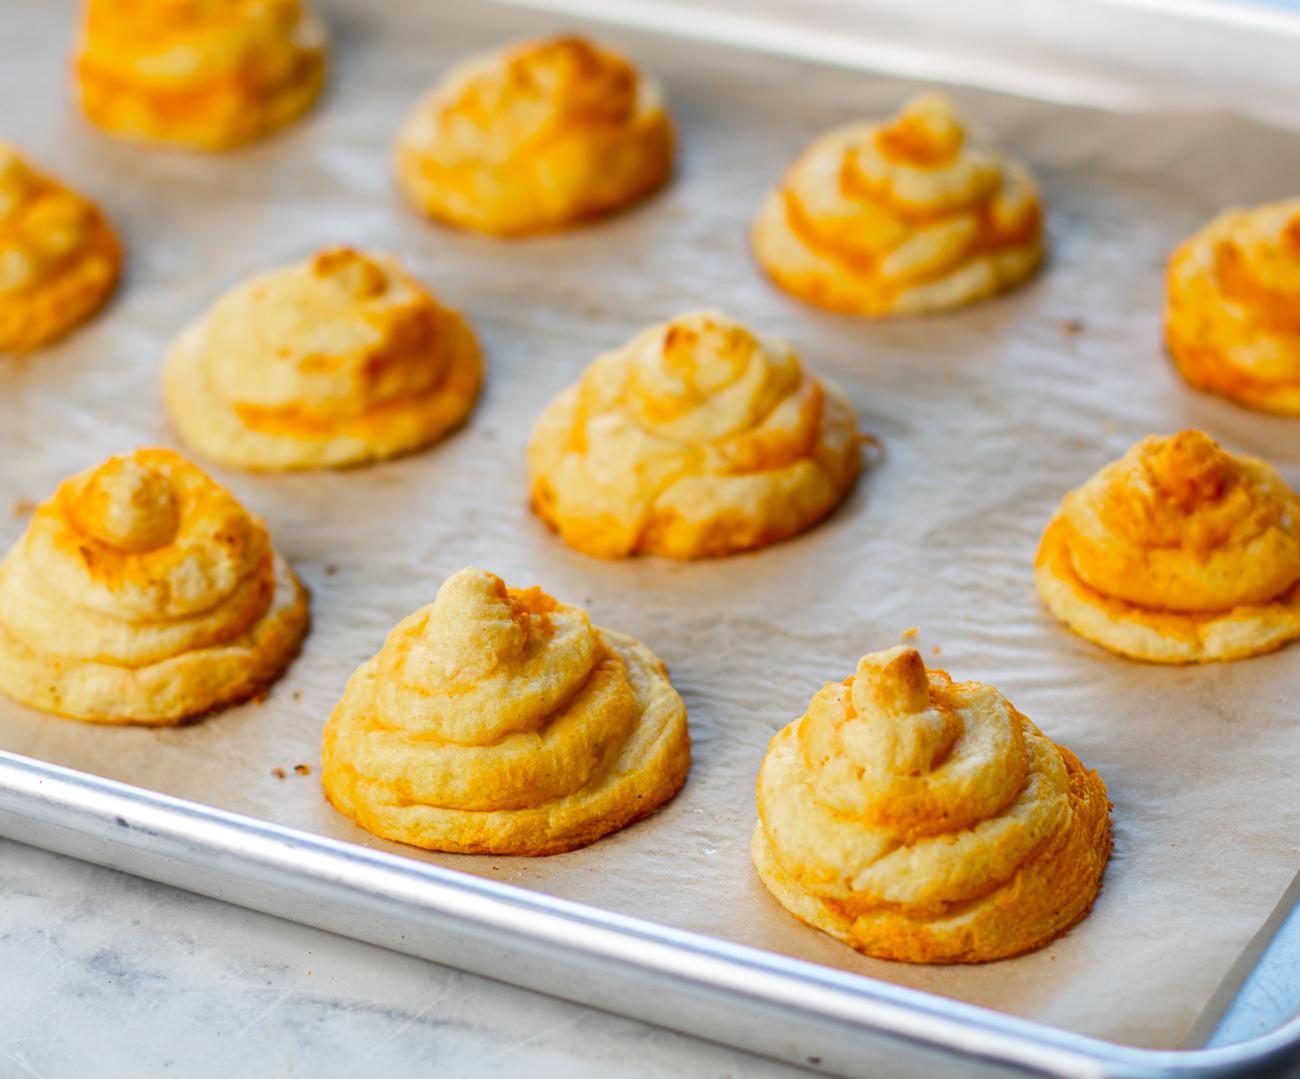 Duchess Potatoes with Butternut Squash Swirl out of the oven